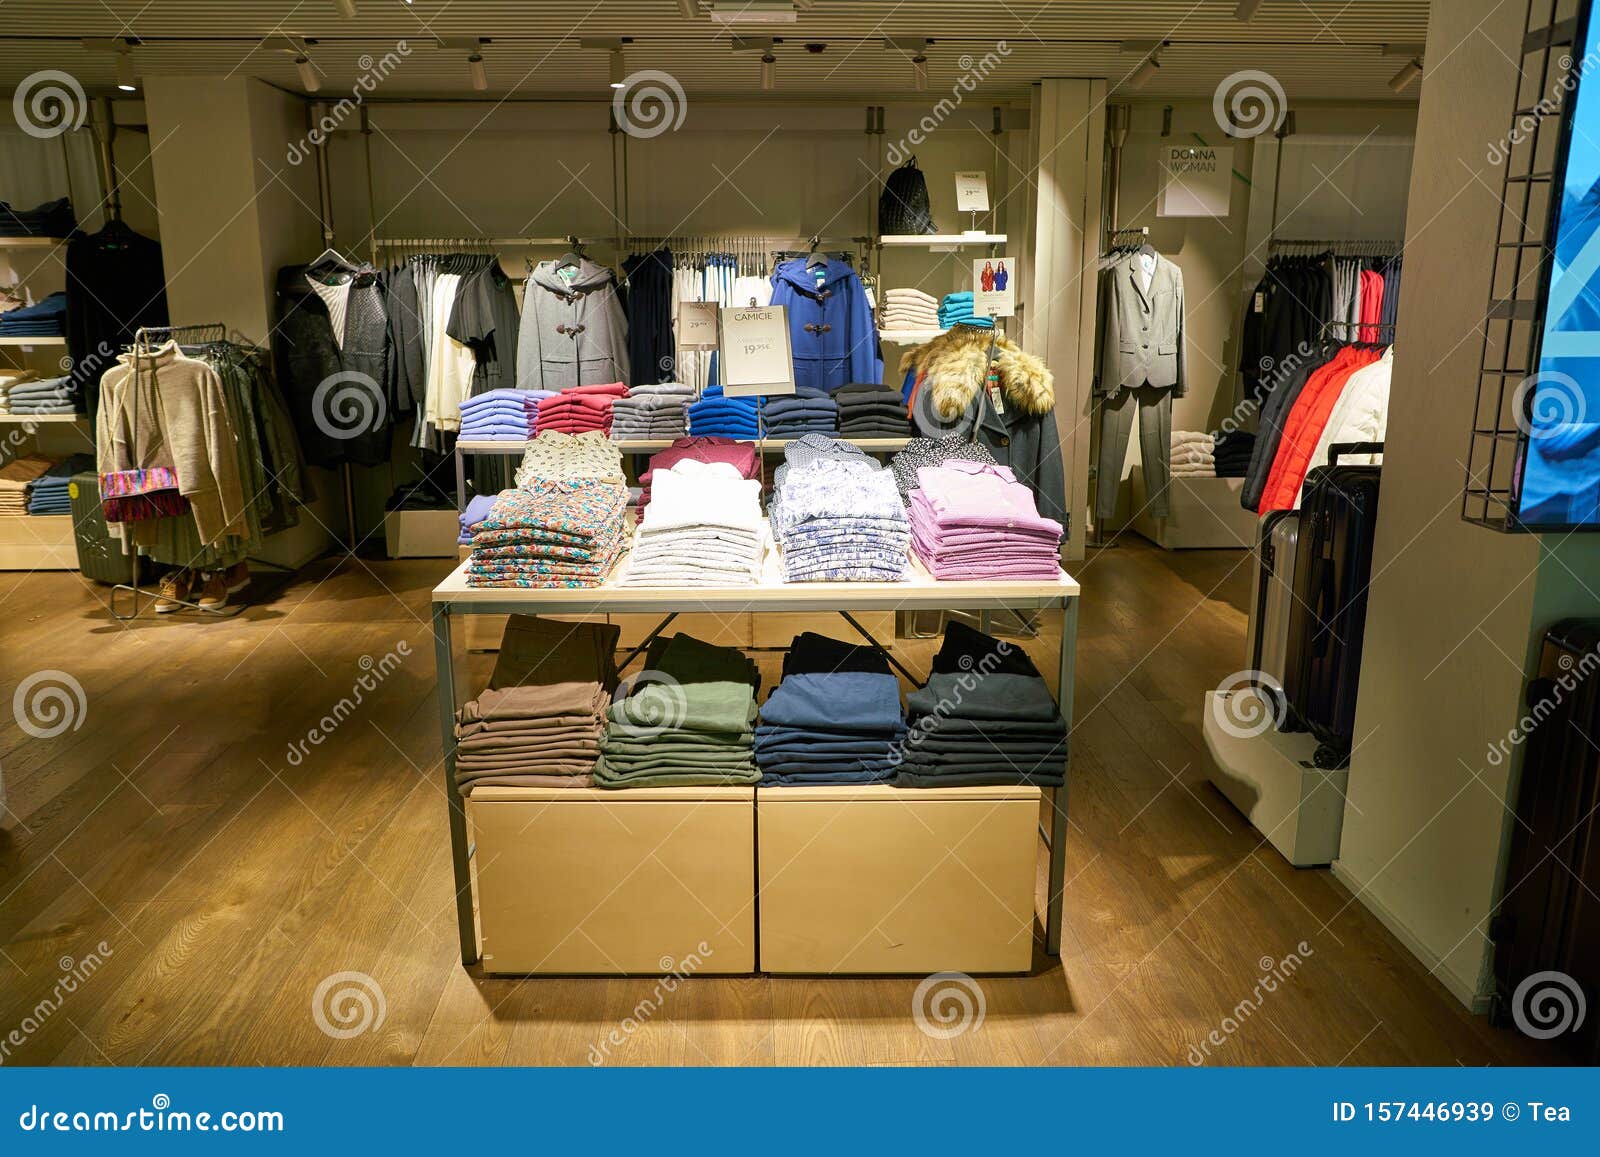 United Colors of Benetton editorial stock image. Image of clothes ...